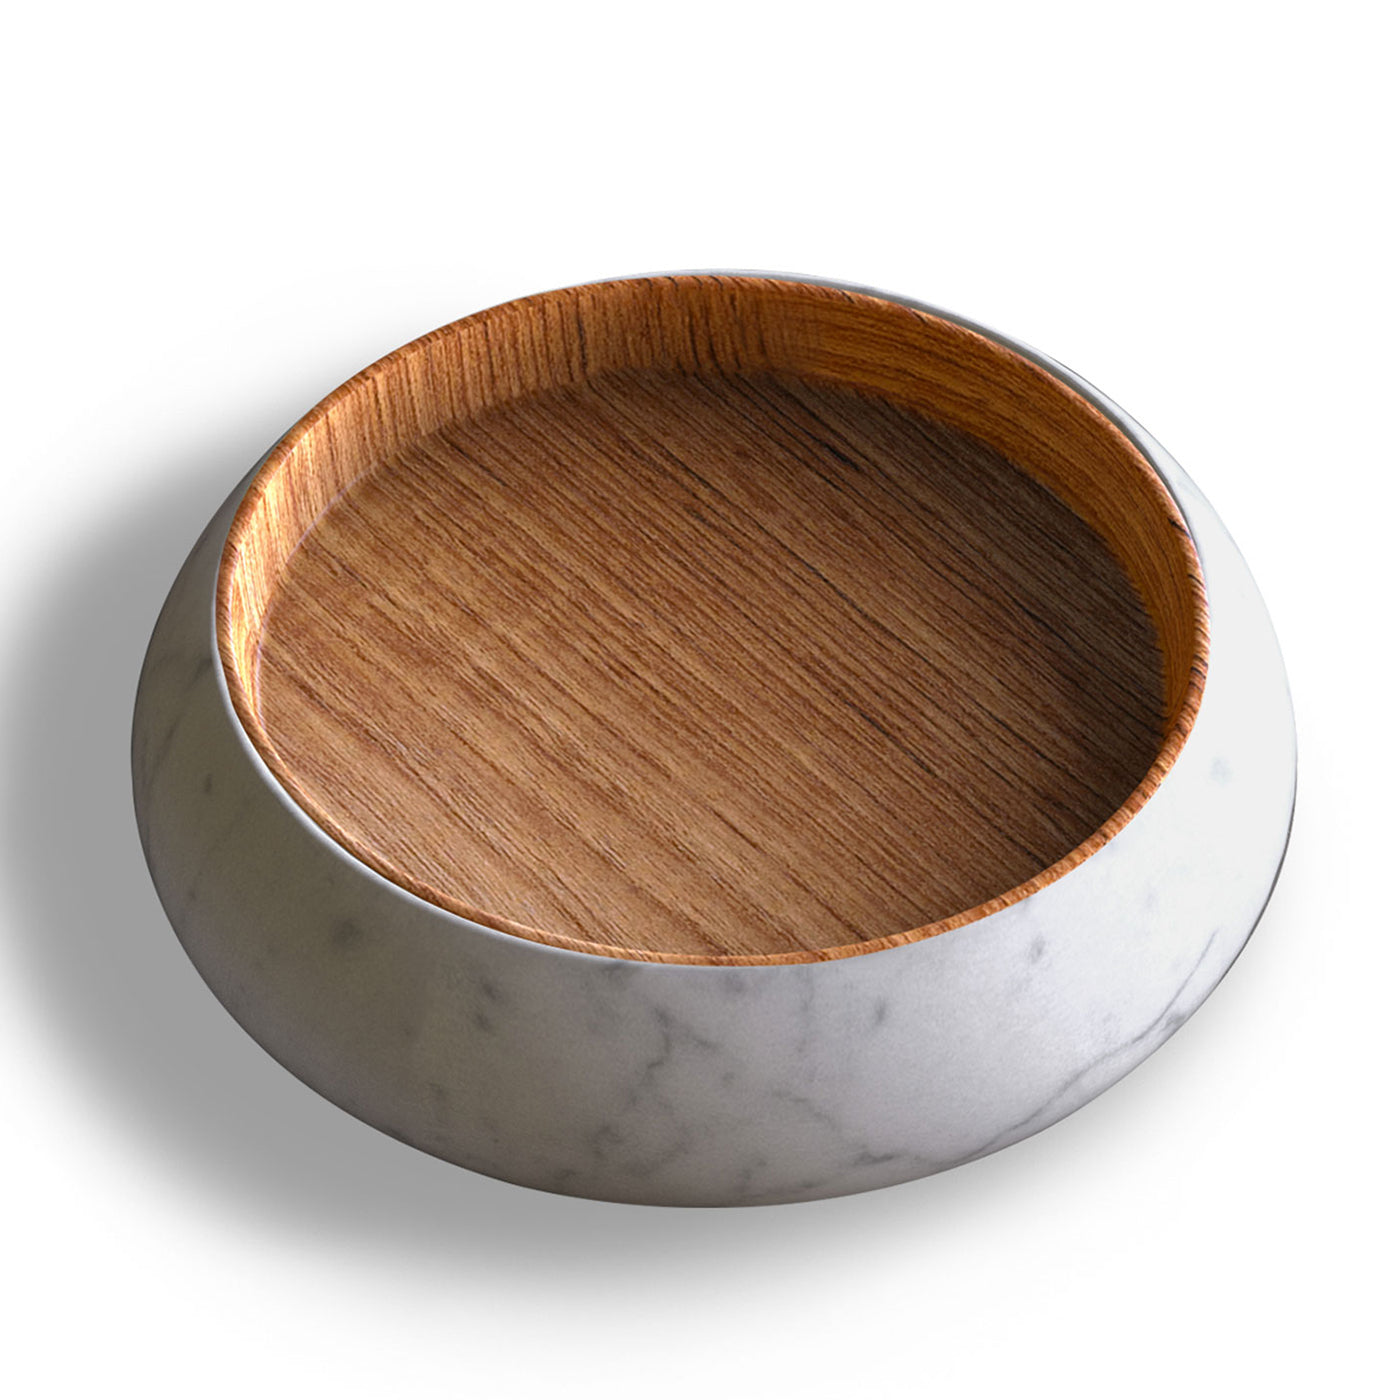 Sasso Serving Bowl with Tray by Mr. Smith Studio  - Alternative view 1